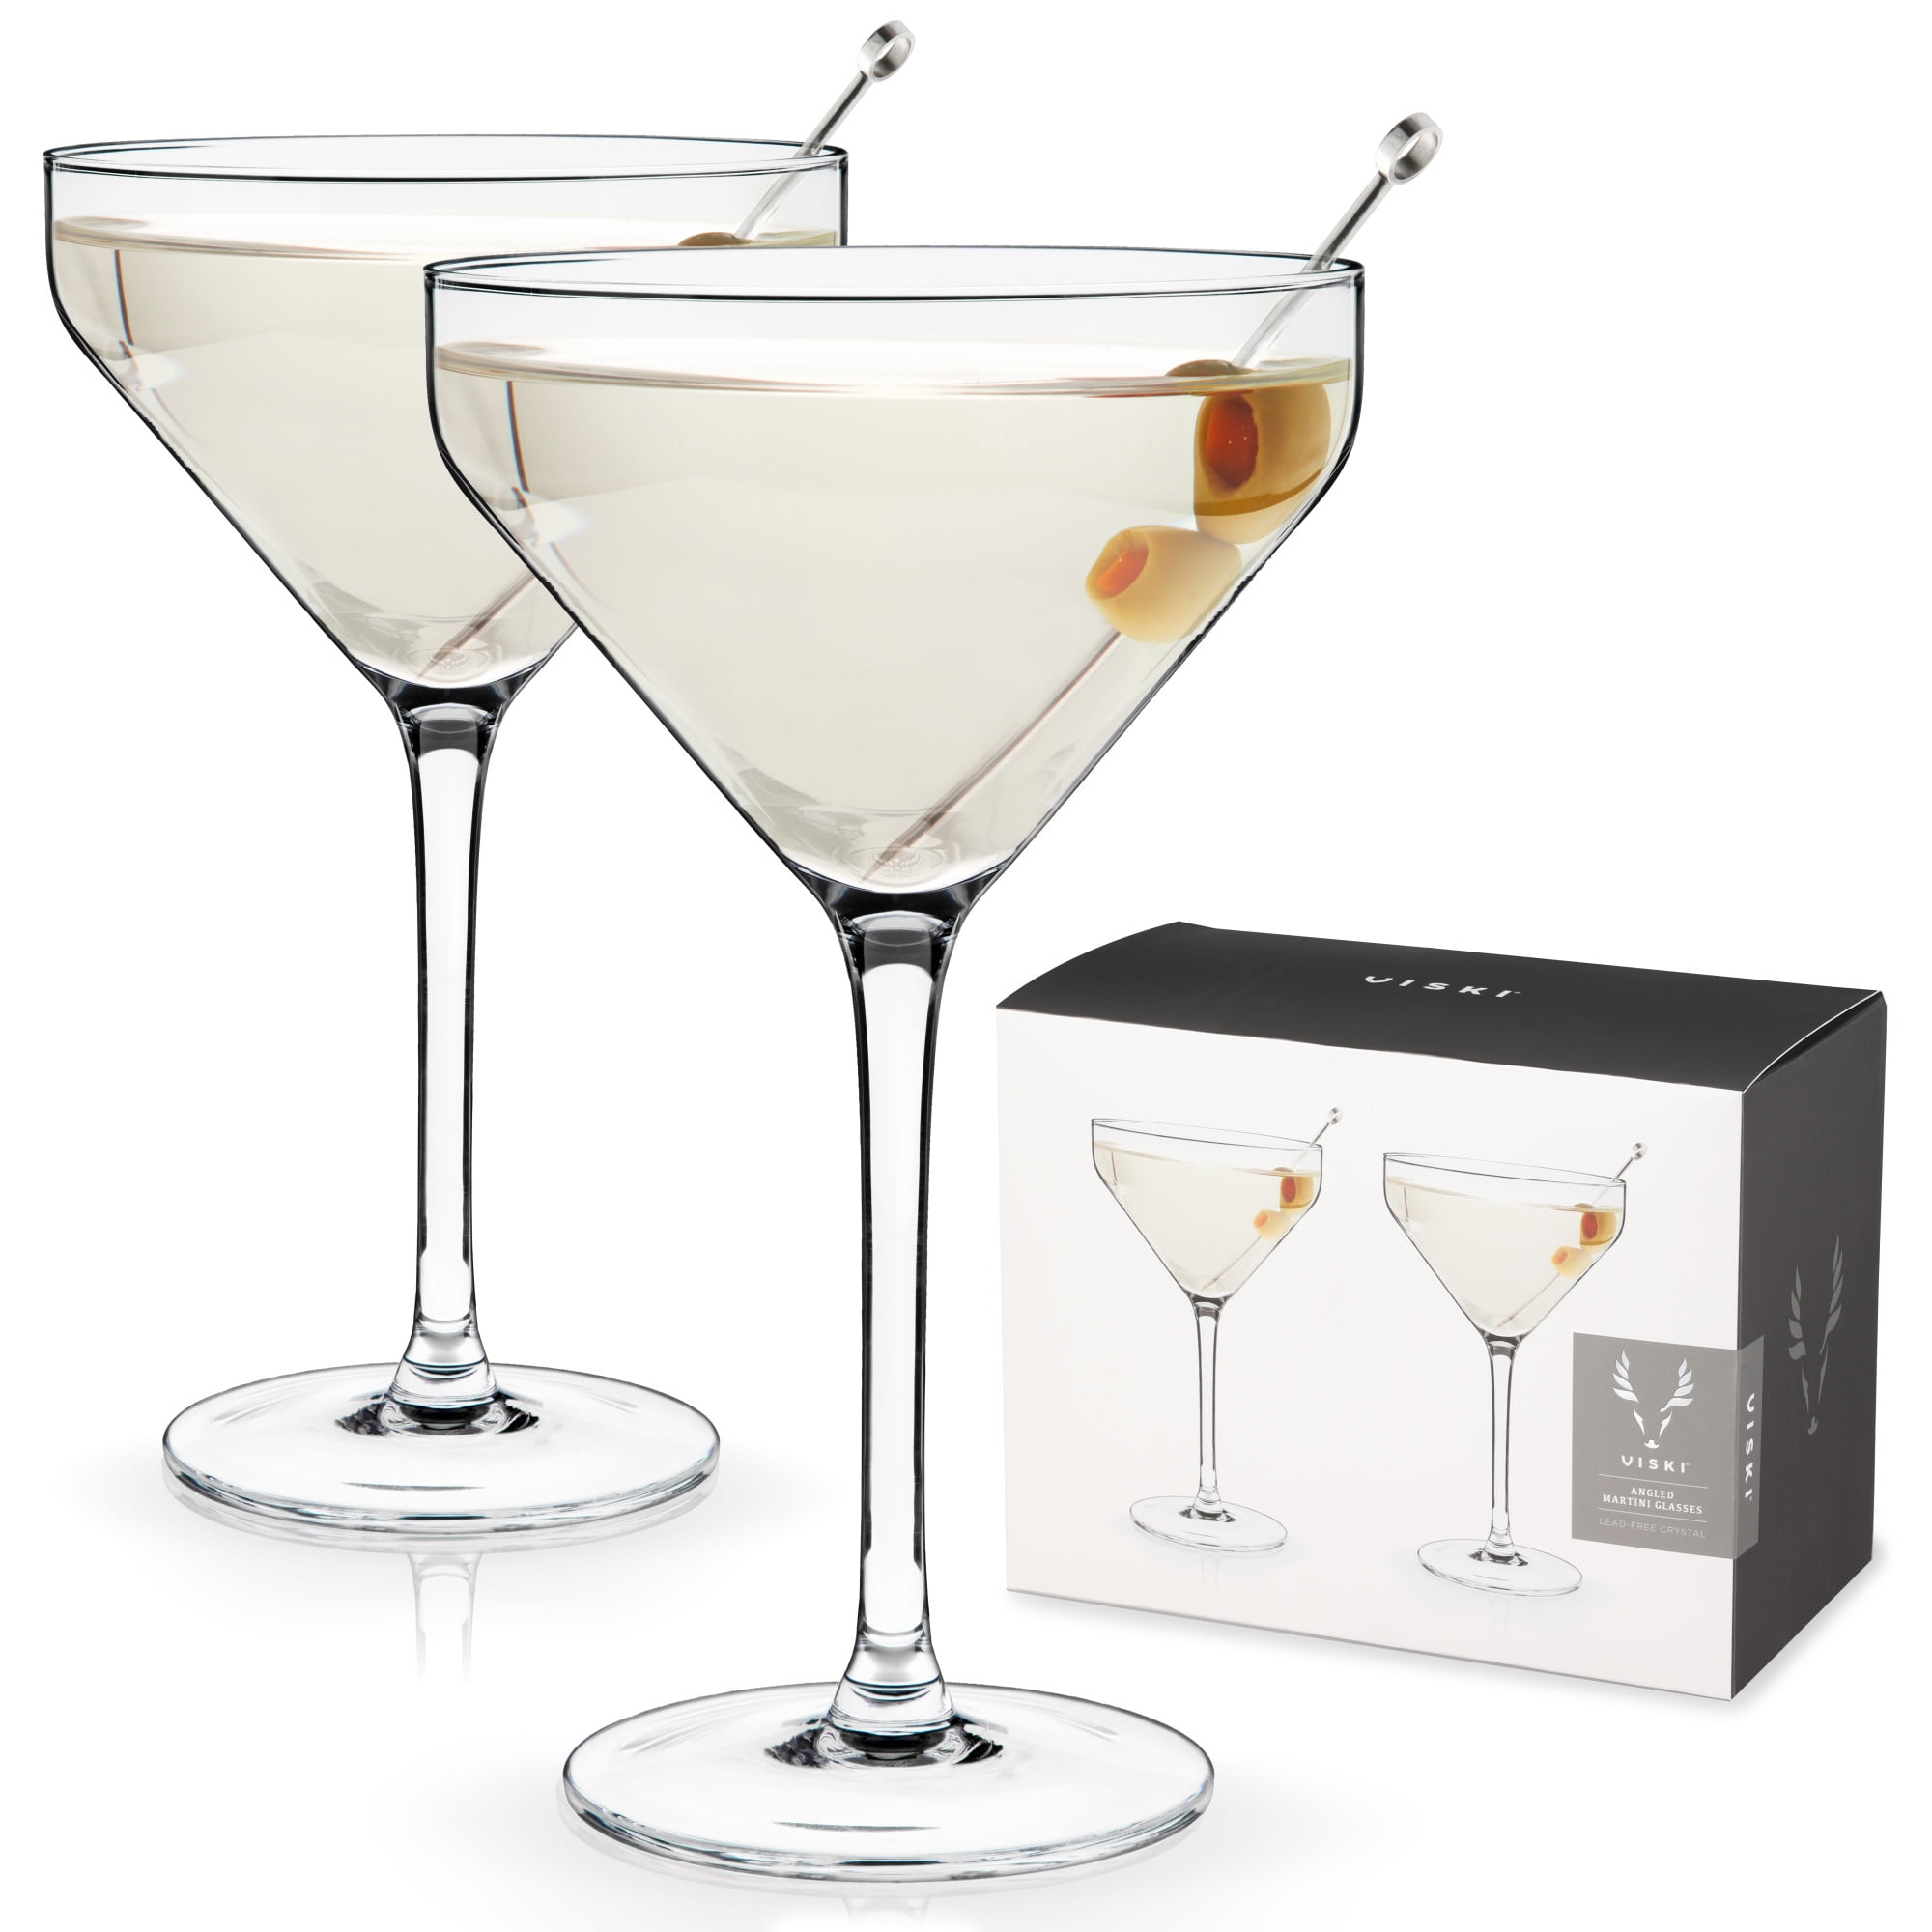 9 oz Martini Glasses Set of 4 for Cocktail Parties, Wedding Gift,  Housewarming, Bar Accessories